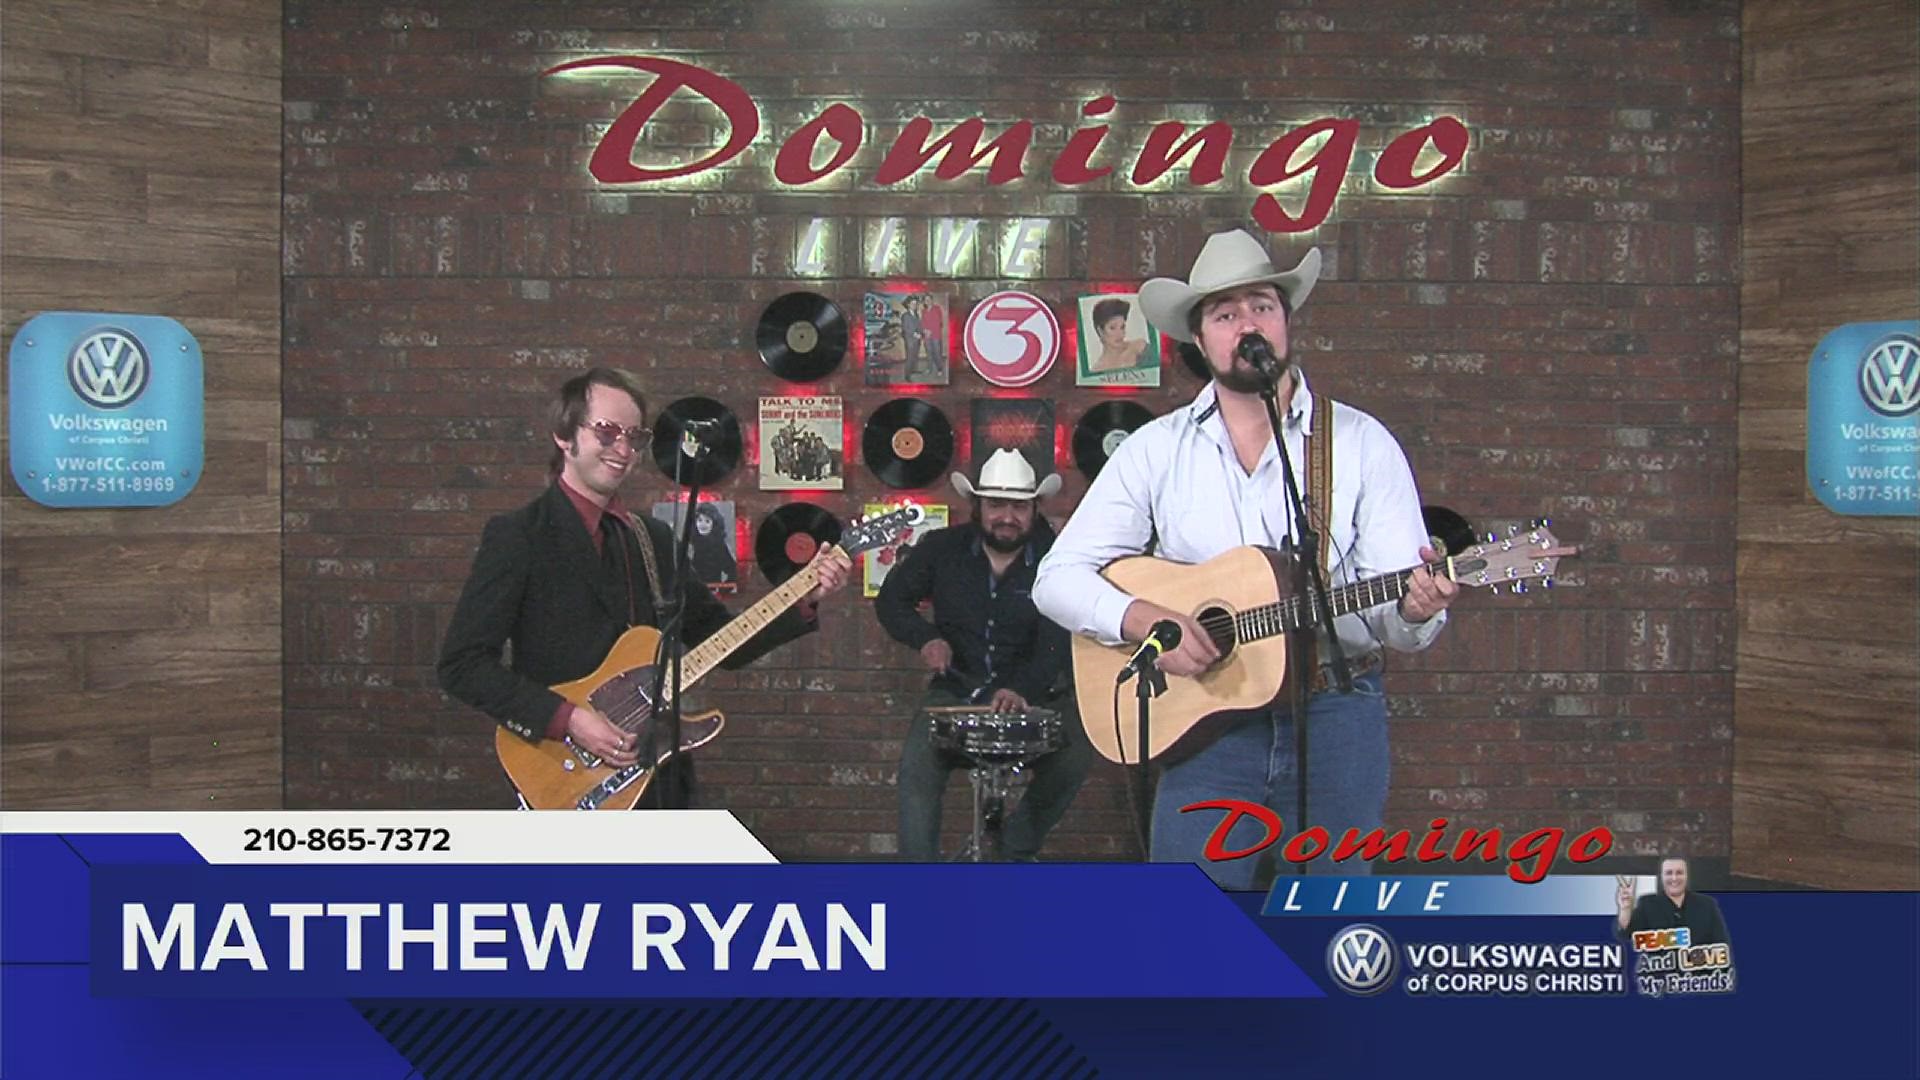 Country singer-songwriter Matthew Ryan and his band perform a cover of Hank Williams, Sr.'s "Honky Tonkin'" on Domingo Live.